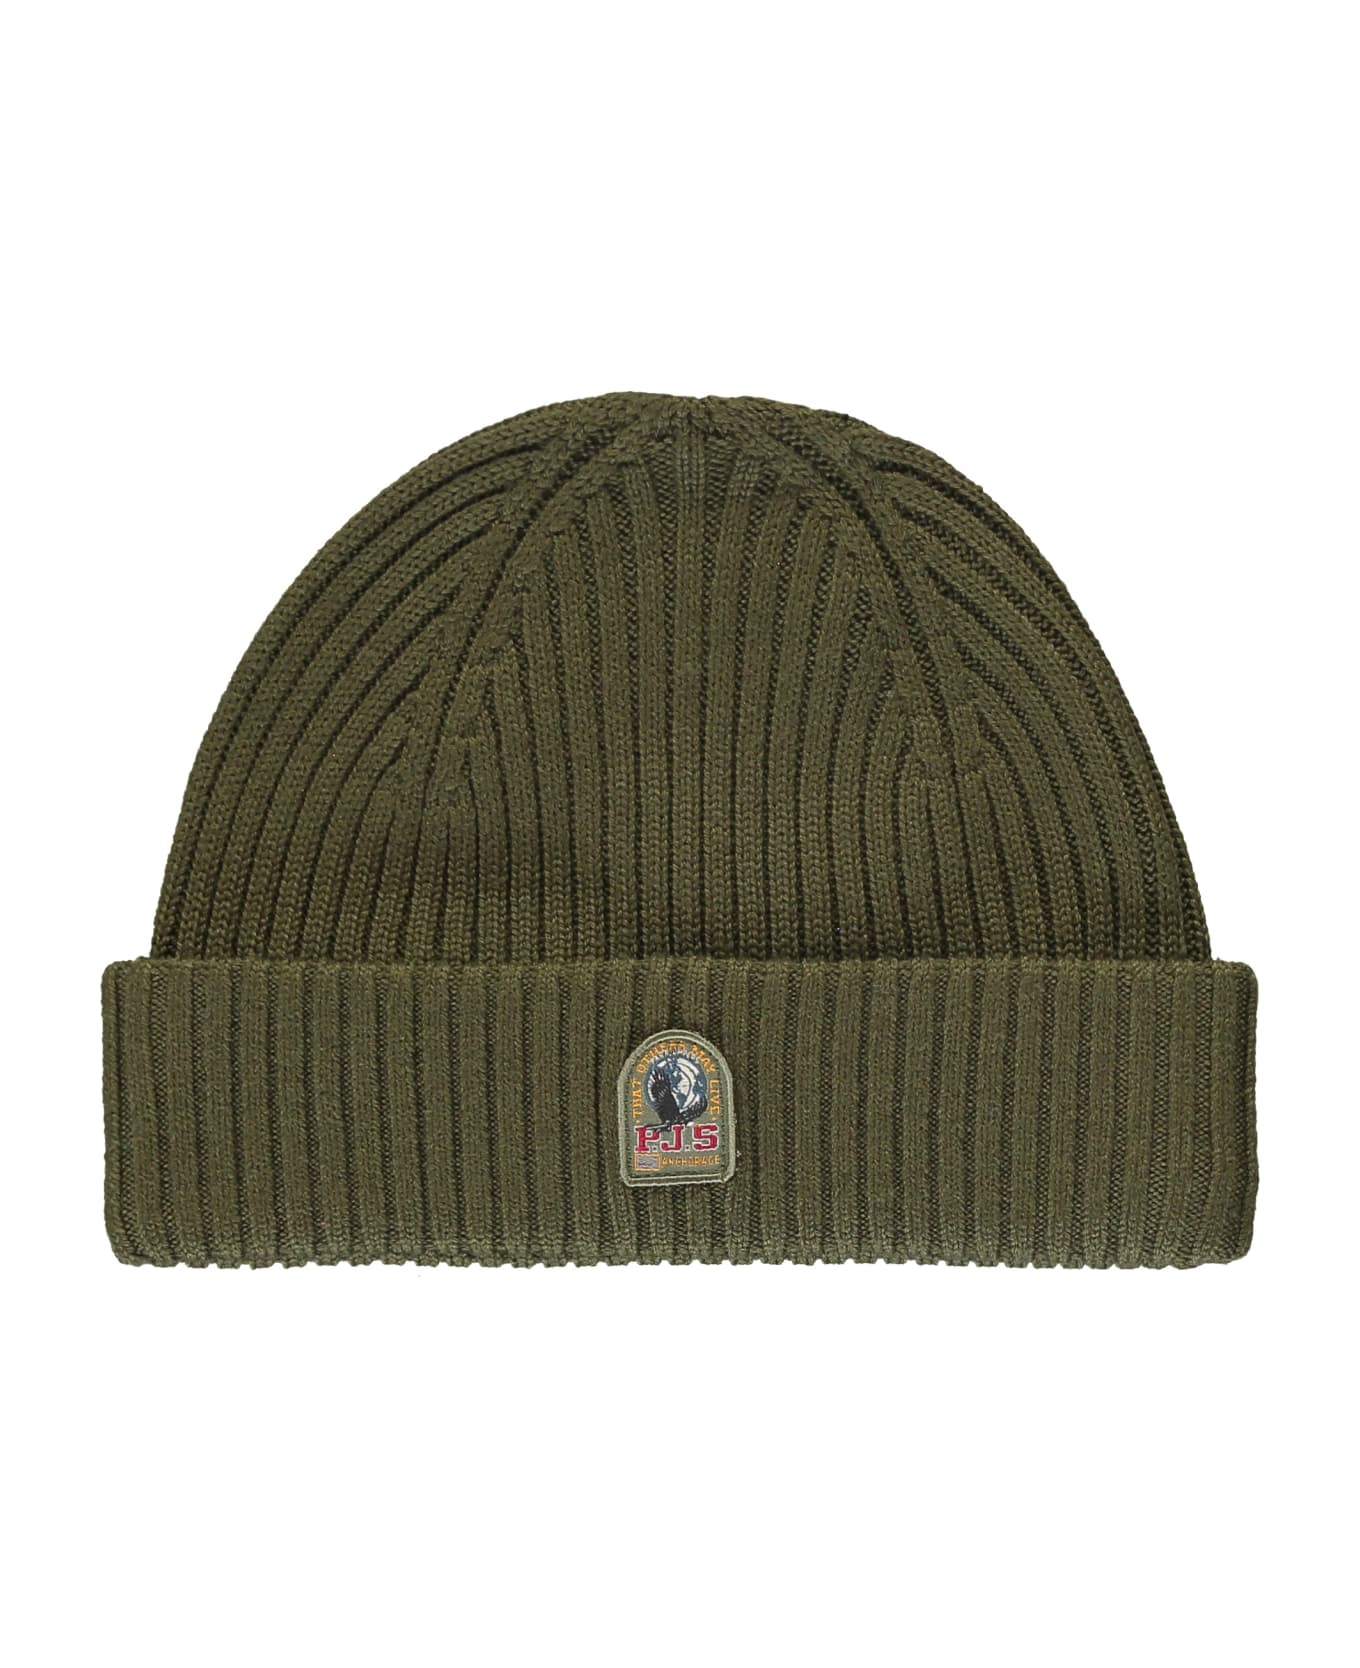 Parajumpers Ribbed Knit Beanie - green